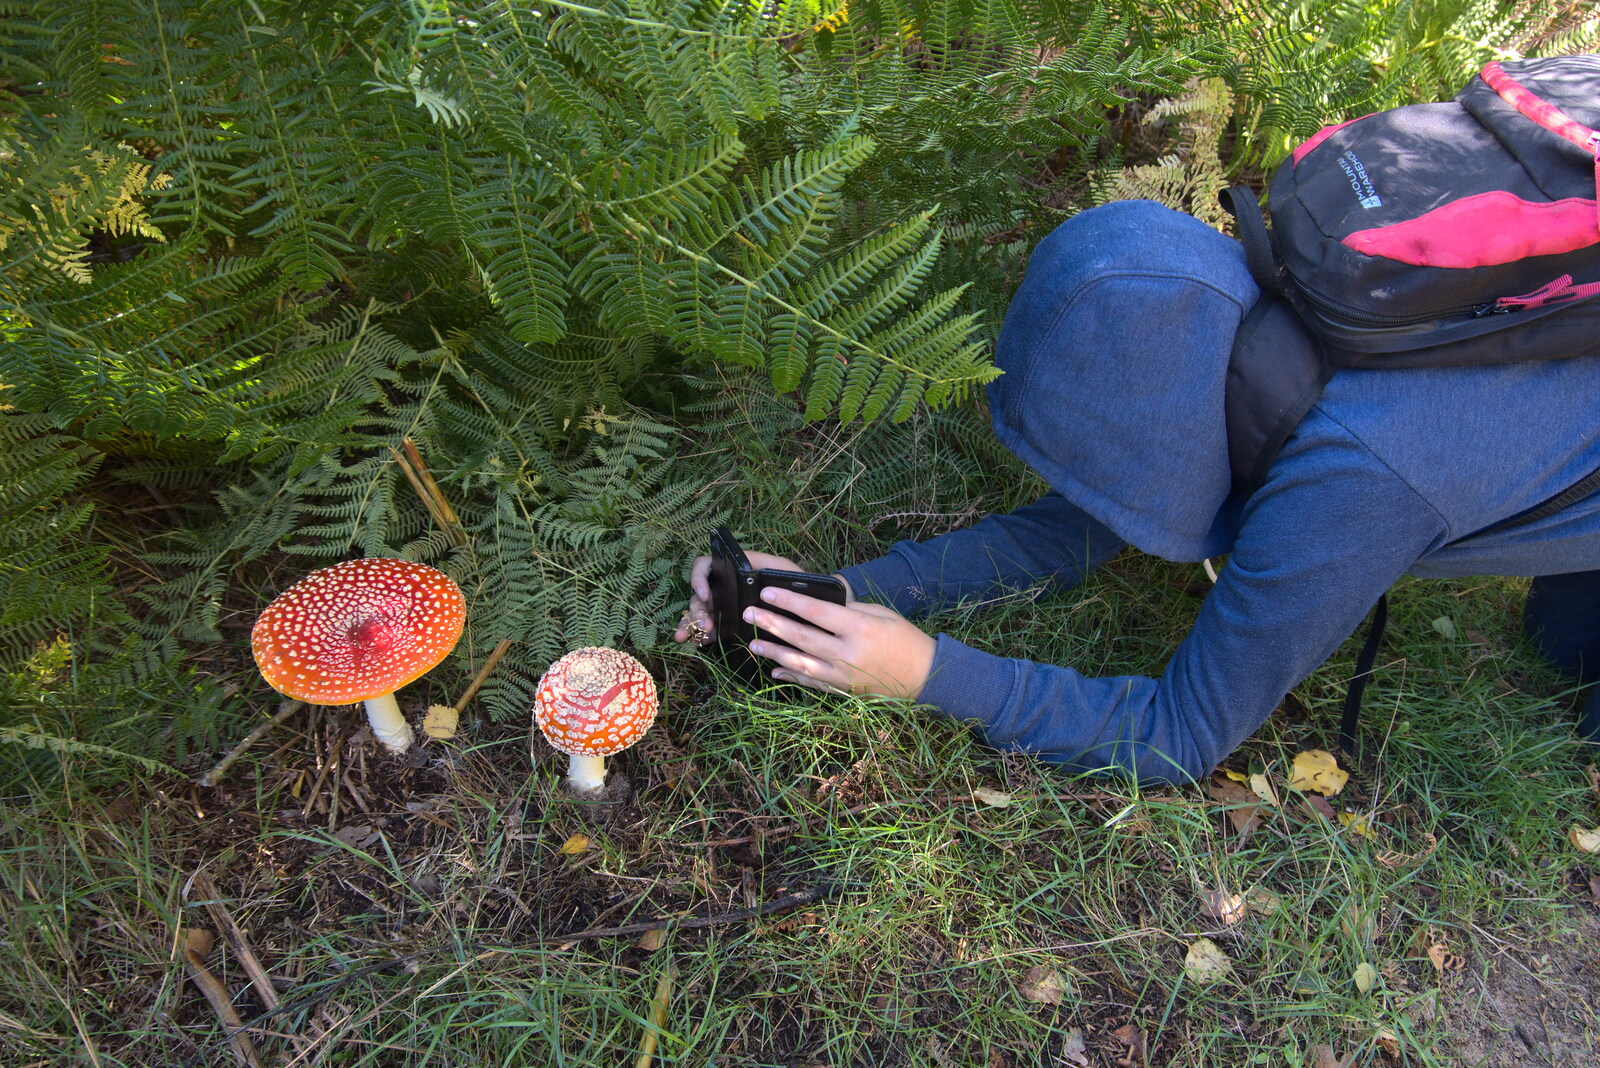 Harry's Scout Hike, Walberswick and Dunwich, Suffolk - 9th October 2022: Fred gets in close for a fungi photo